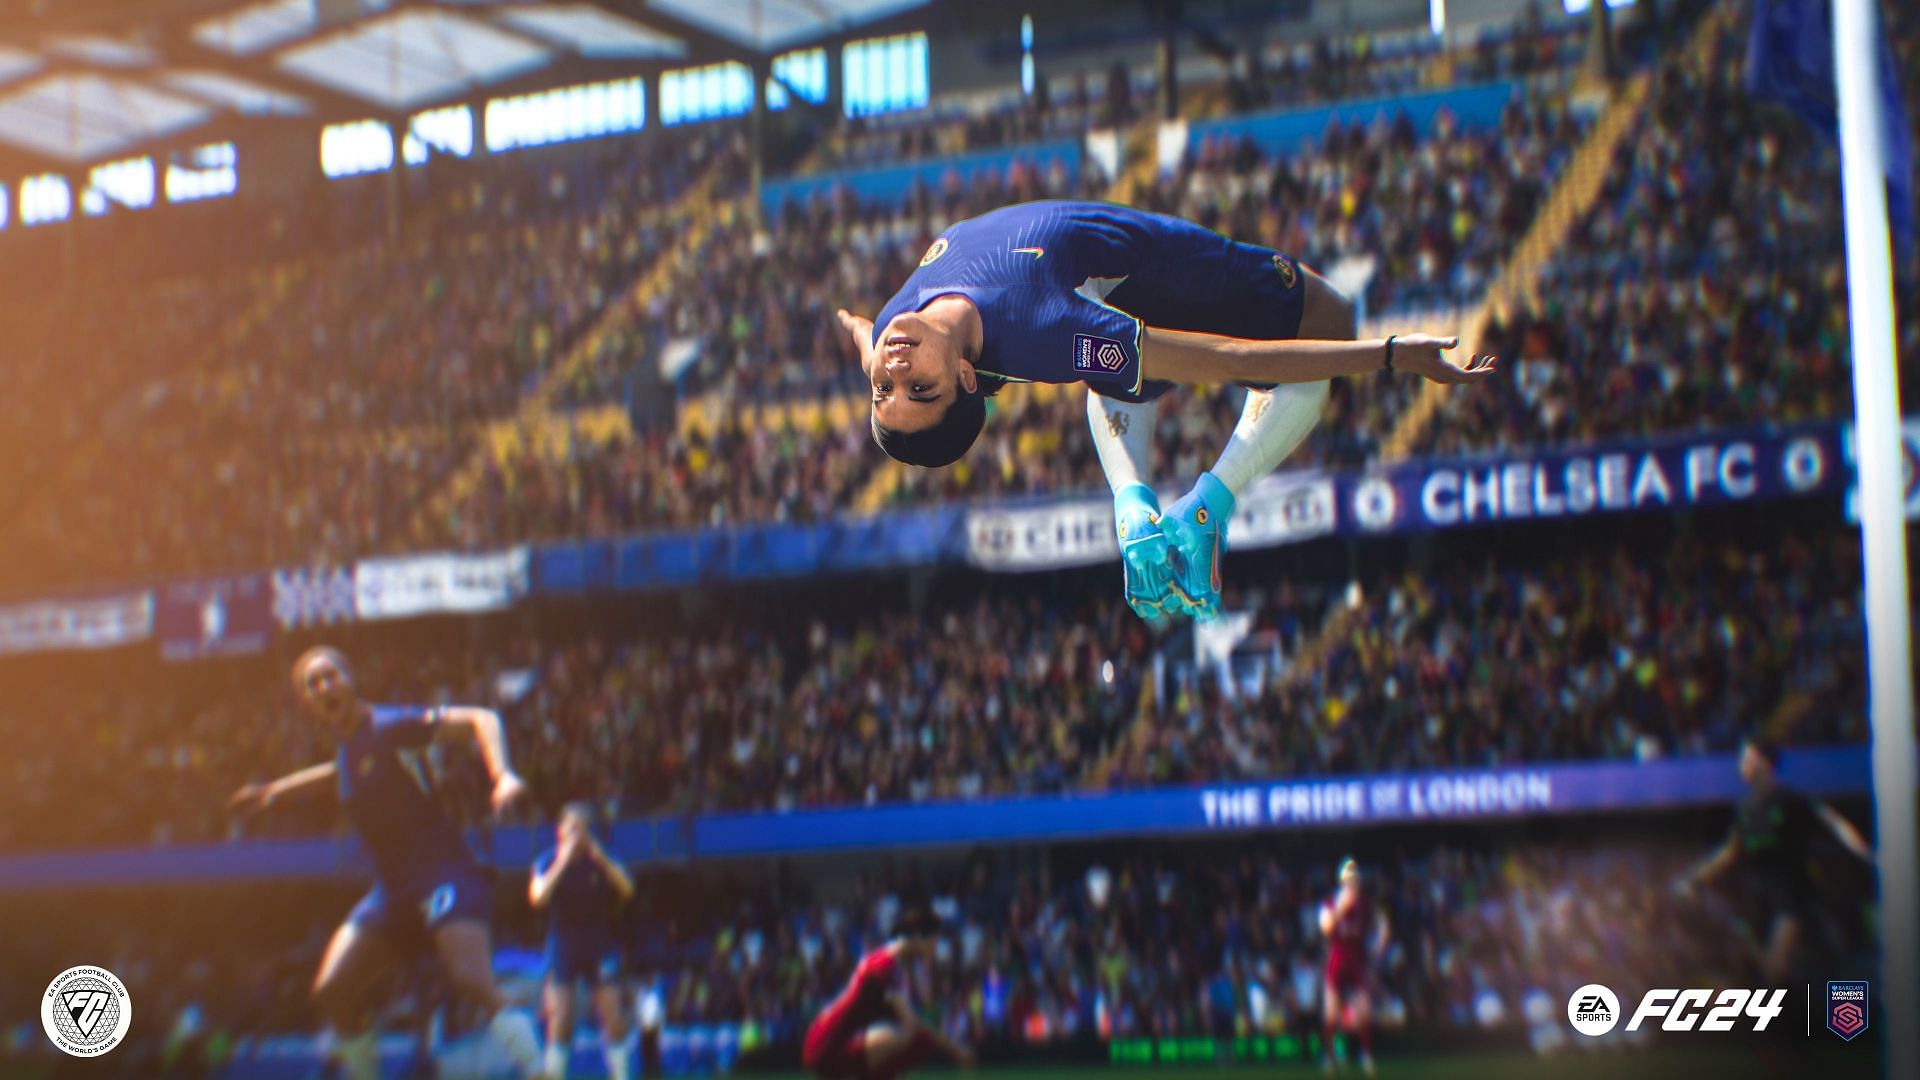 The release date of EA FC Mobile has been announced